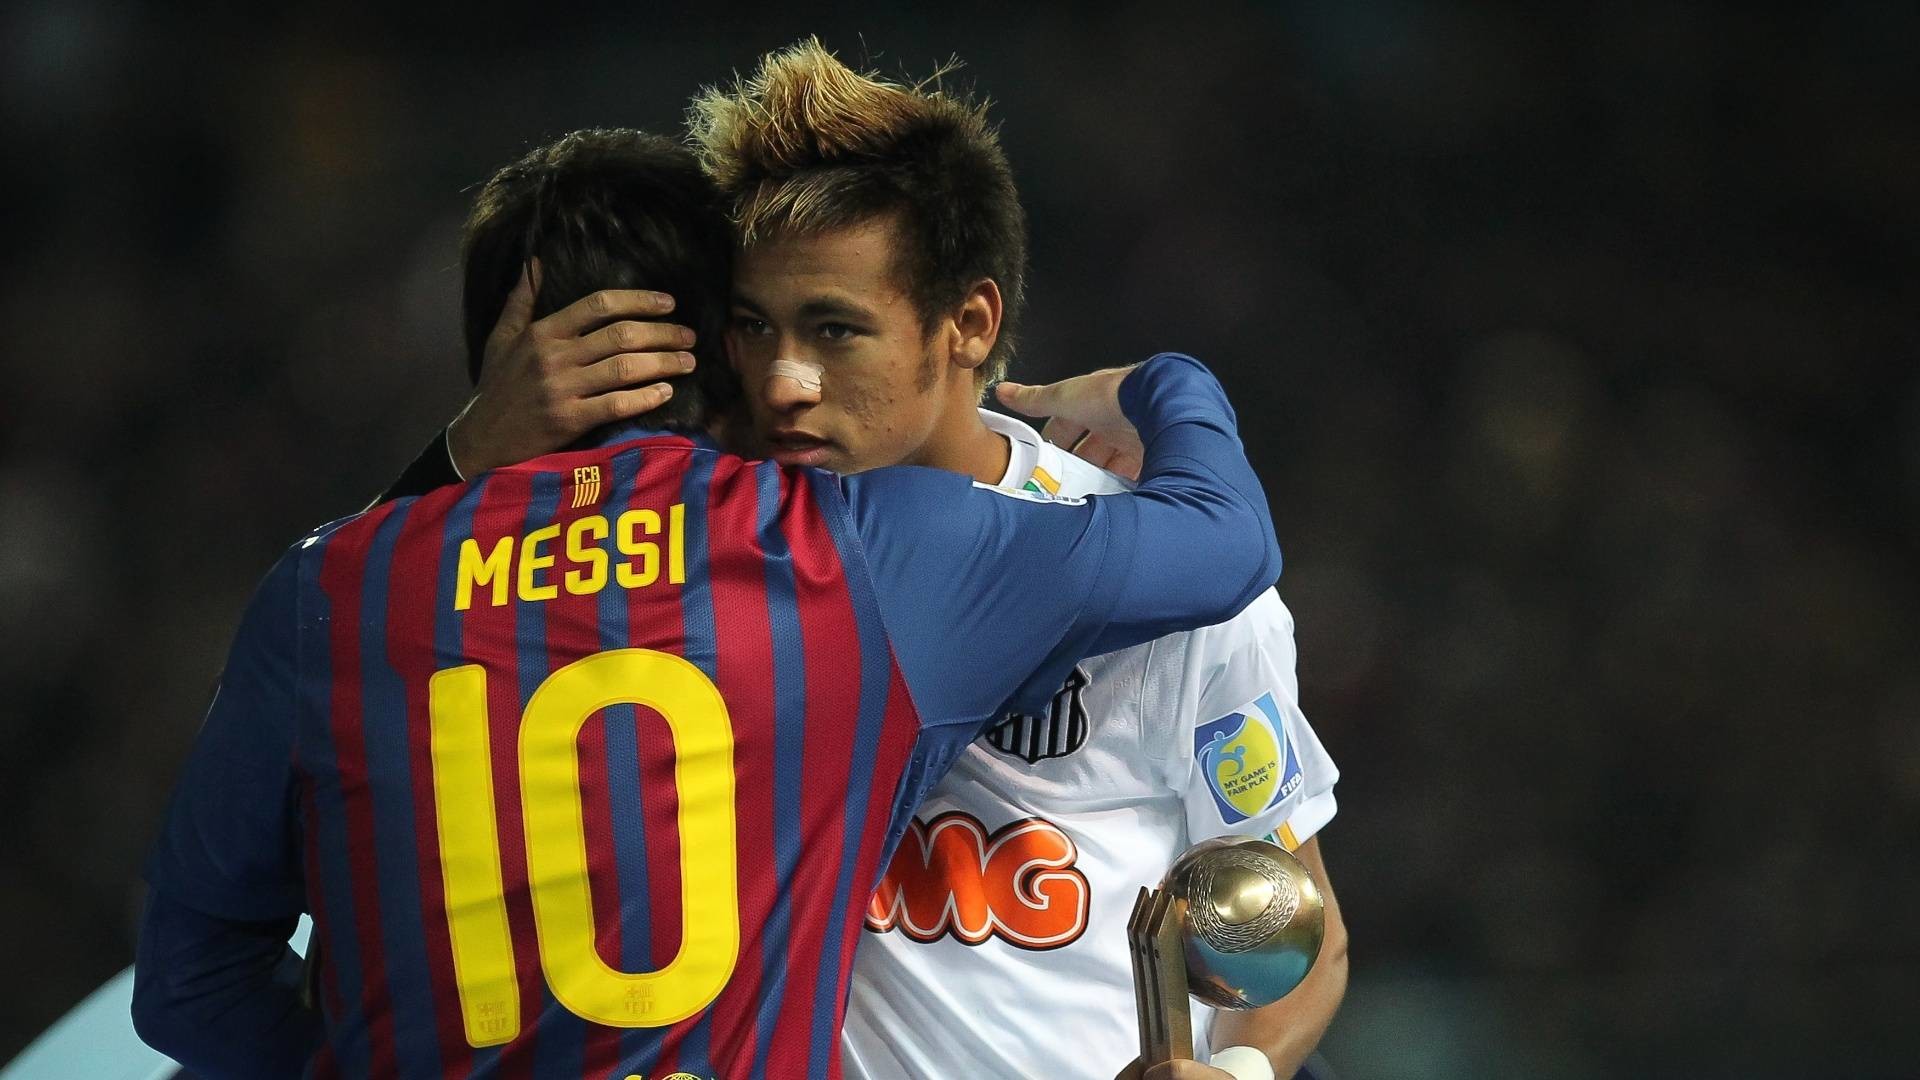 1920x1080 38570-soccer-we-are-frnds Neymar wallpaper HD free wallpapers .